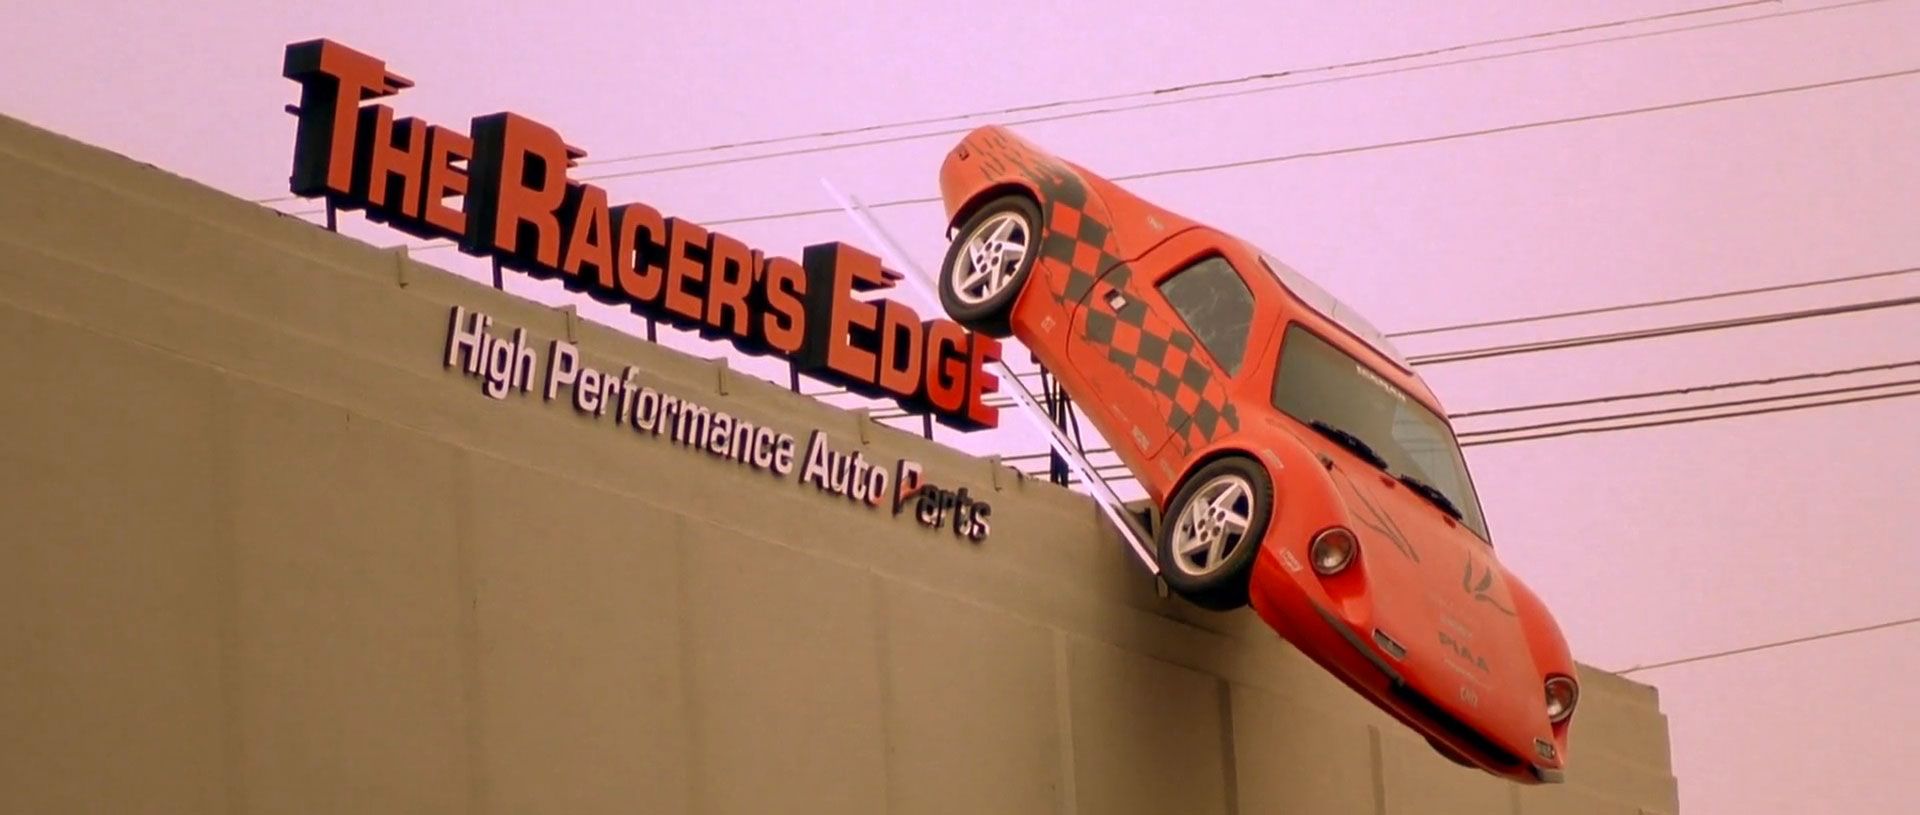 The Racer's Edge | The Fast and the Furious Wiki | FANDOM powered by Wikia1920 x 815